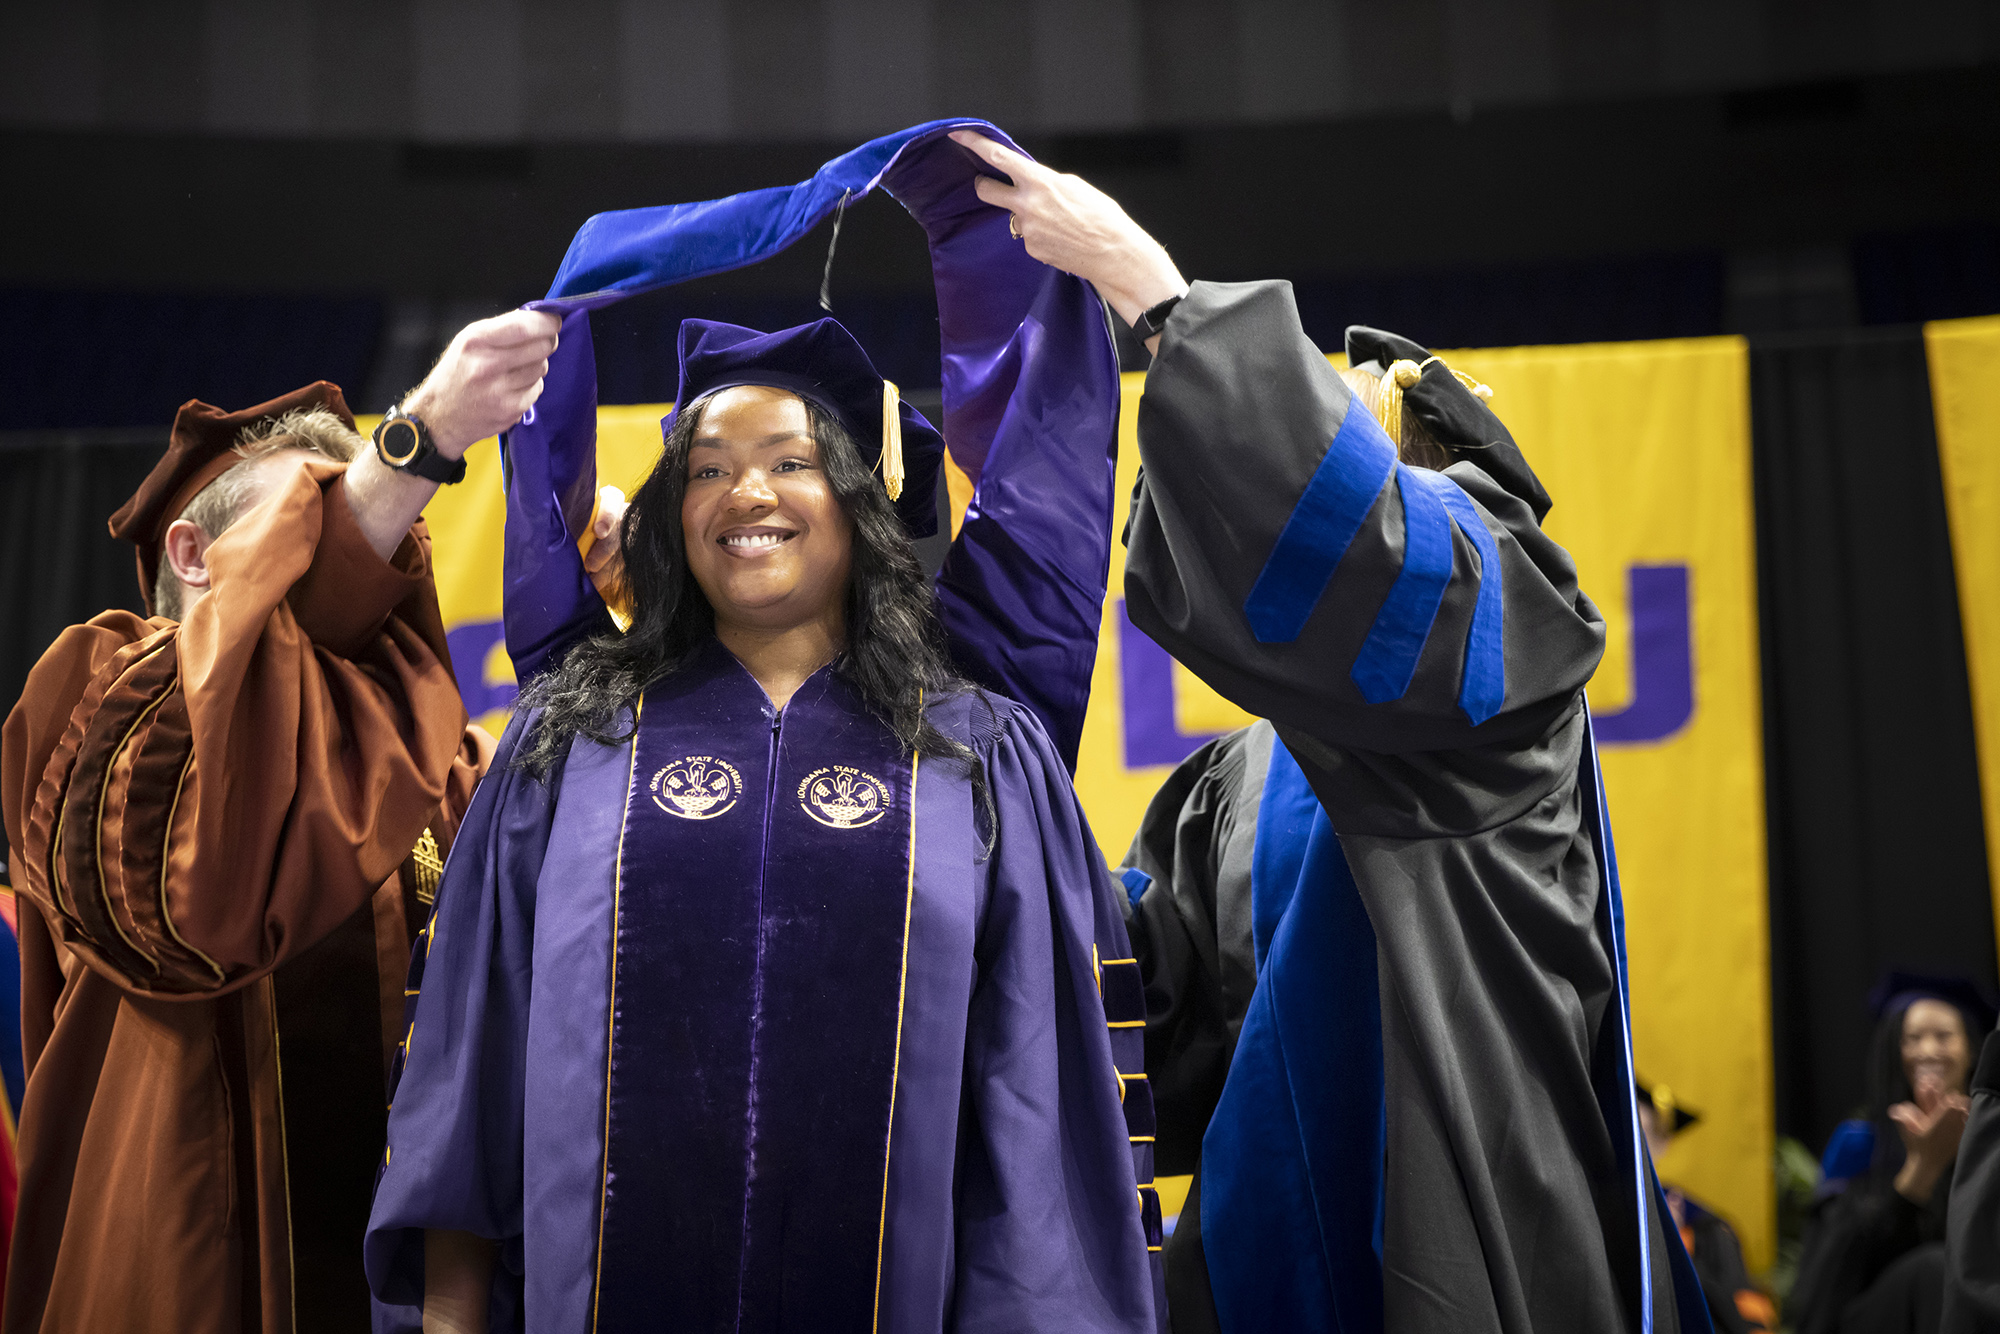 Student honored during commencement ceremony